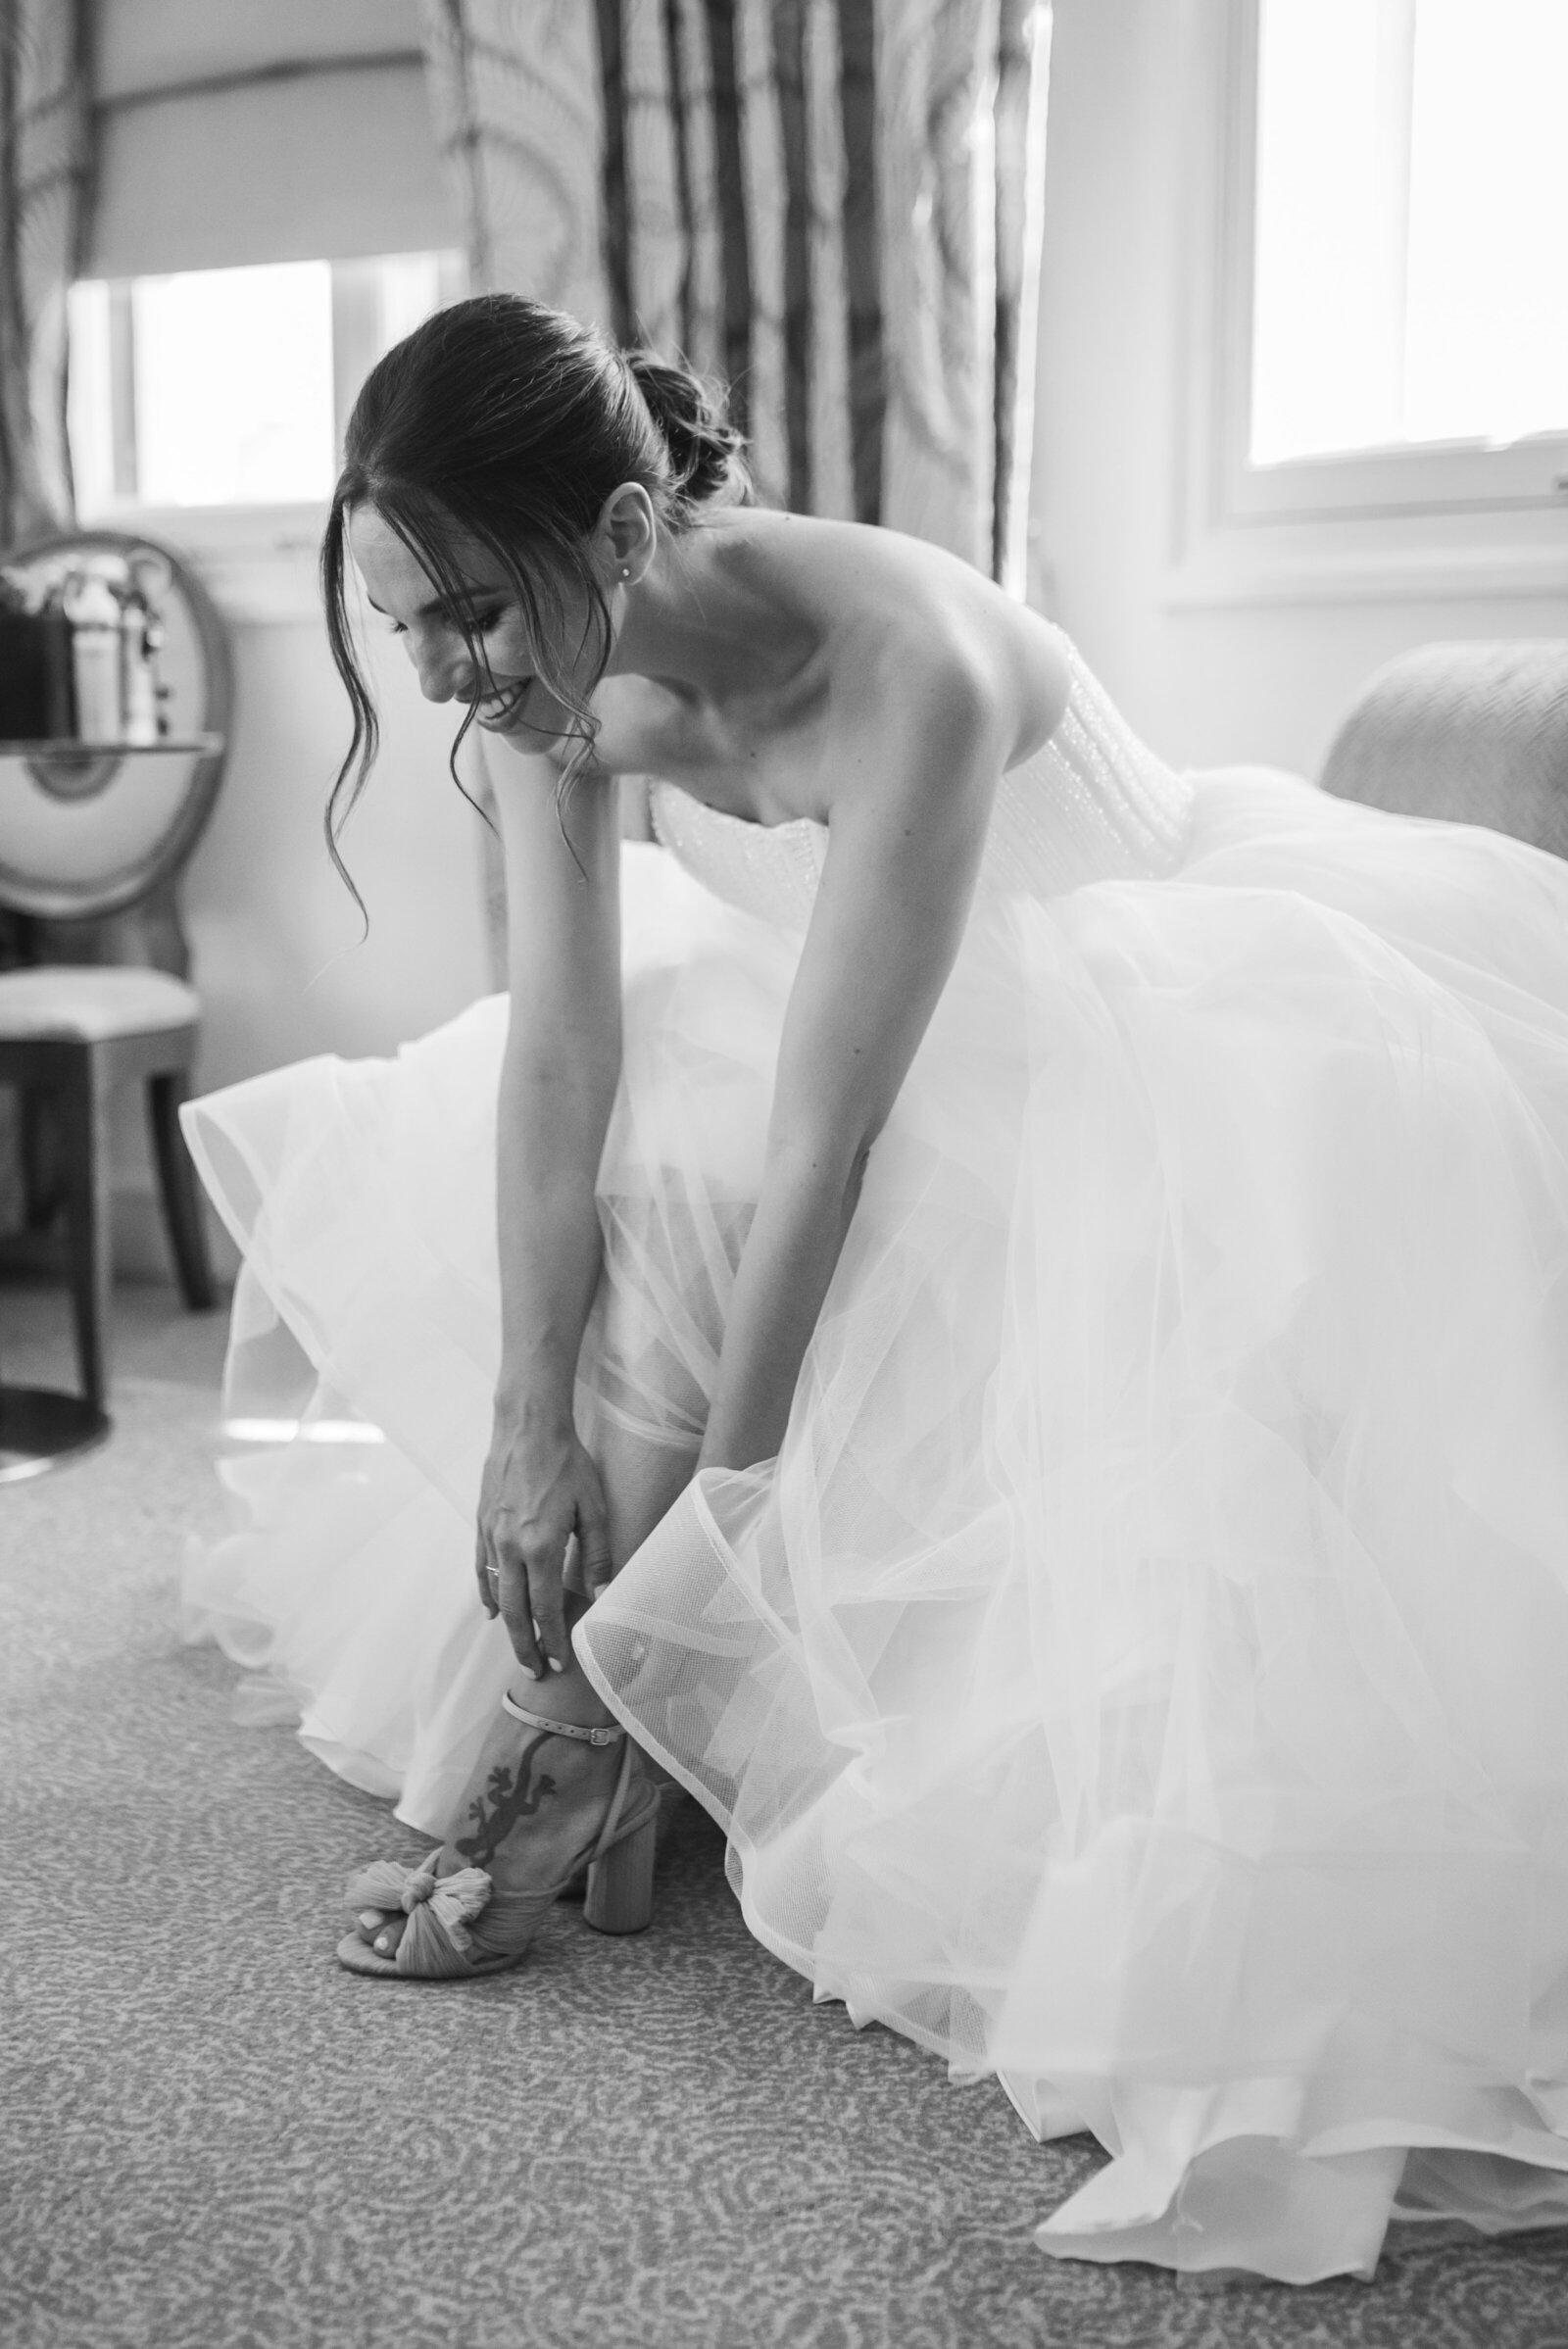 Black and white image of a bride putting on her wedding shoes. The bride is looking down and smiling and is in a ballgown style dress.